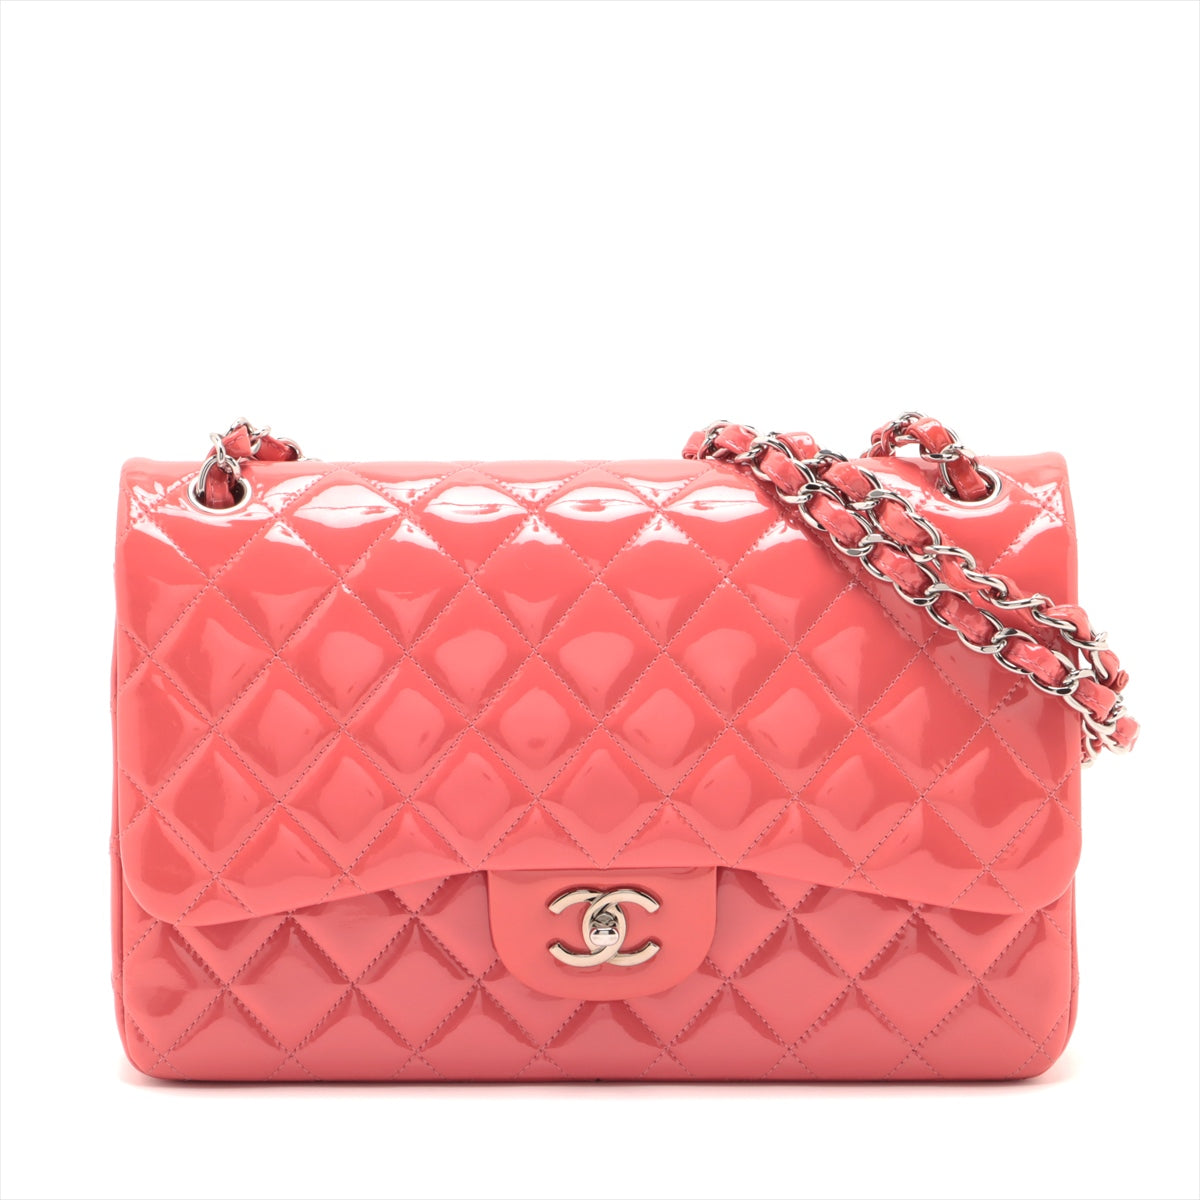 Chanel DEKAMATRASSE 30 Large Patent leather Double flap Double chain bag Pink Silver Metal fittings 17XXXXXX A58600